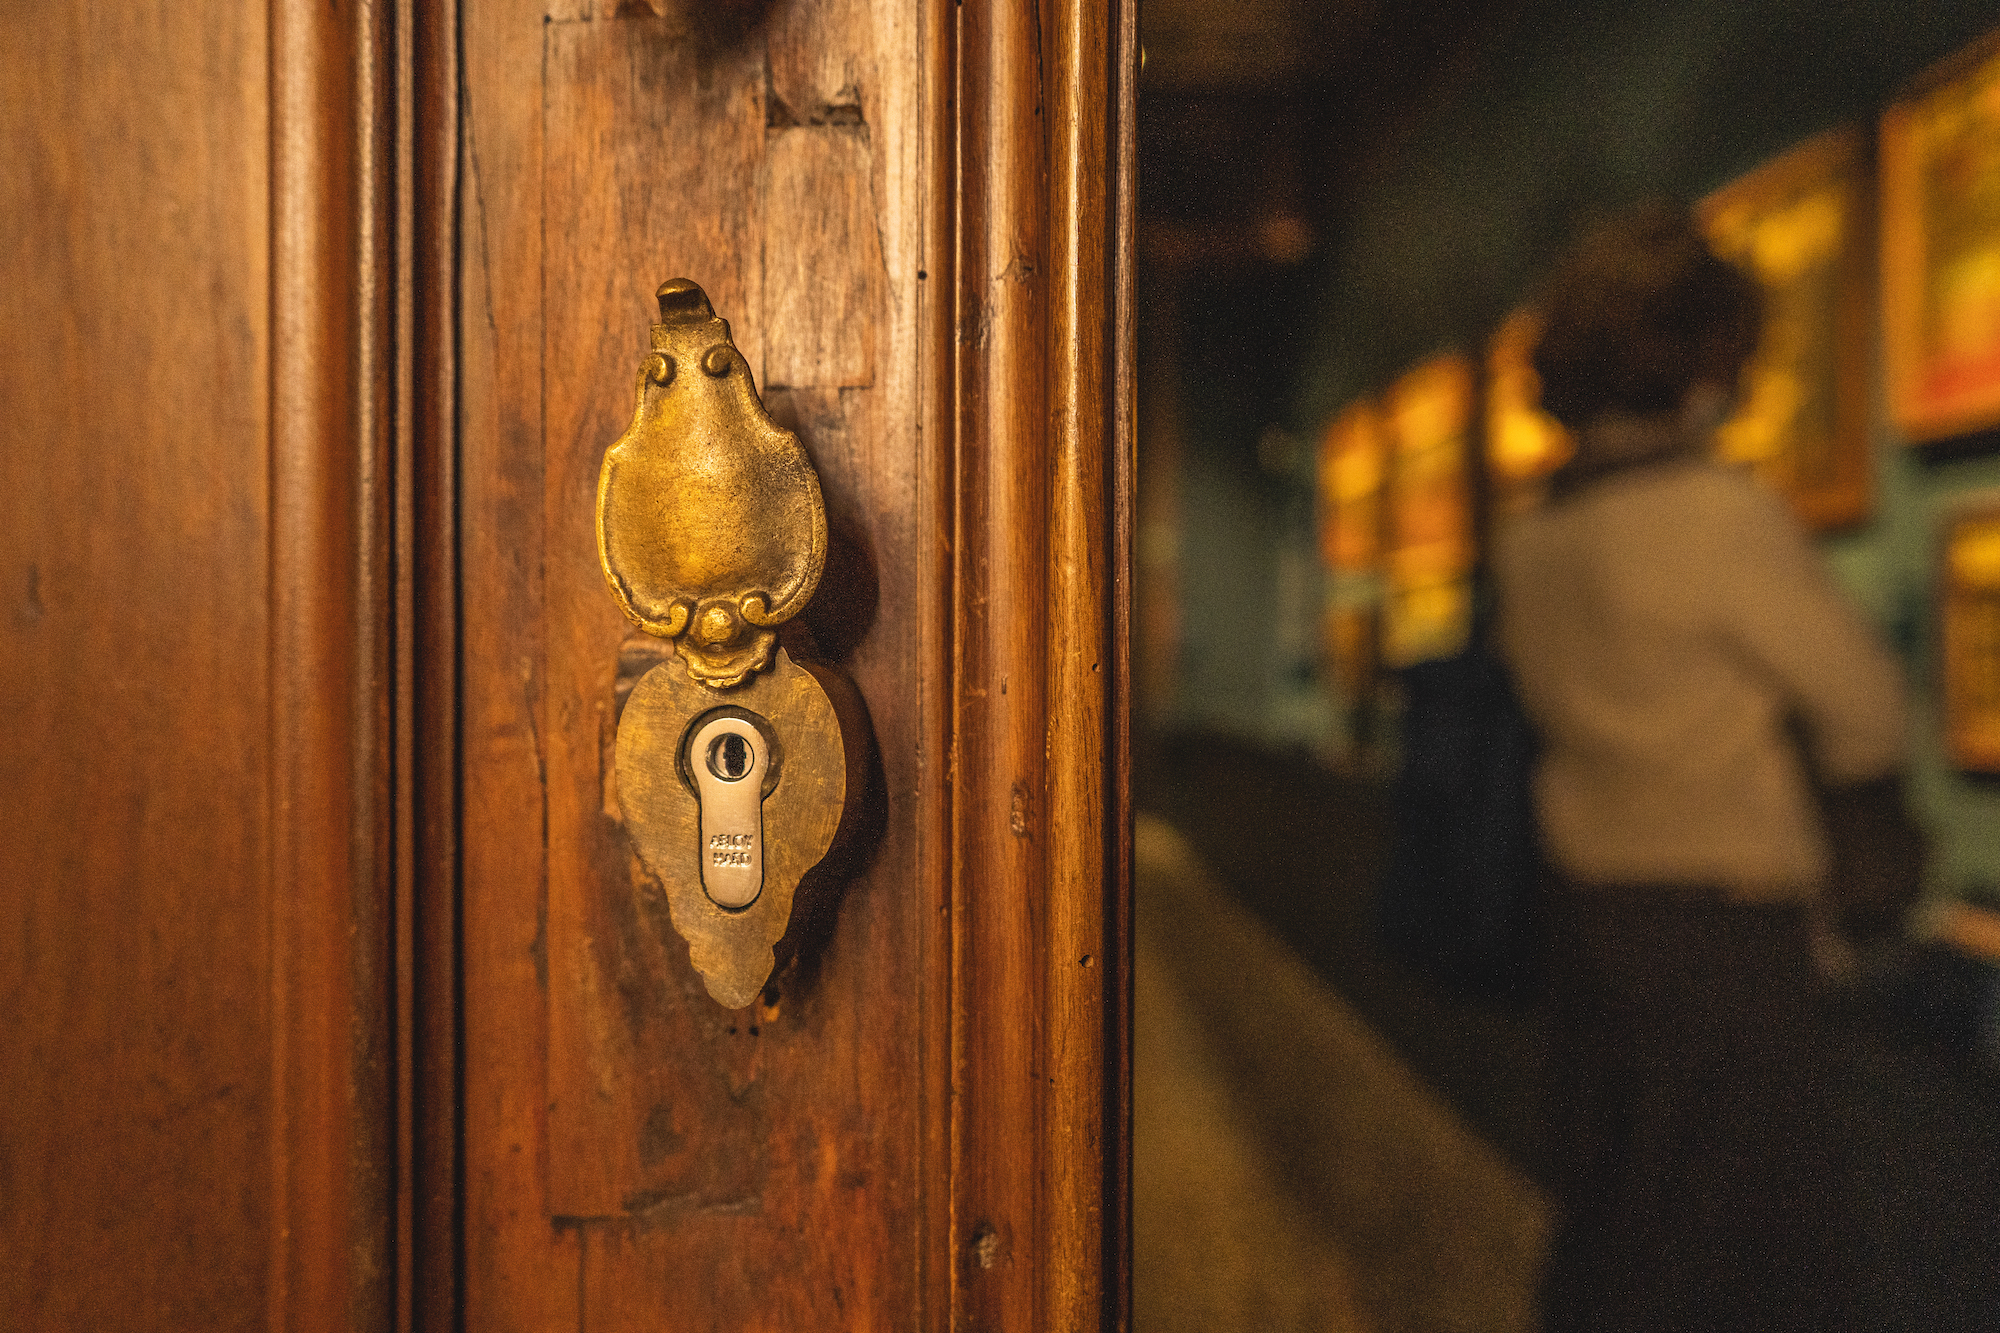 Securing museum collections using digital access control